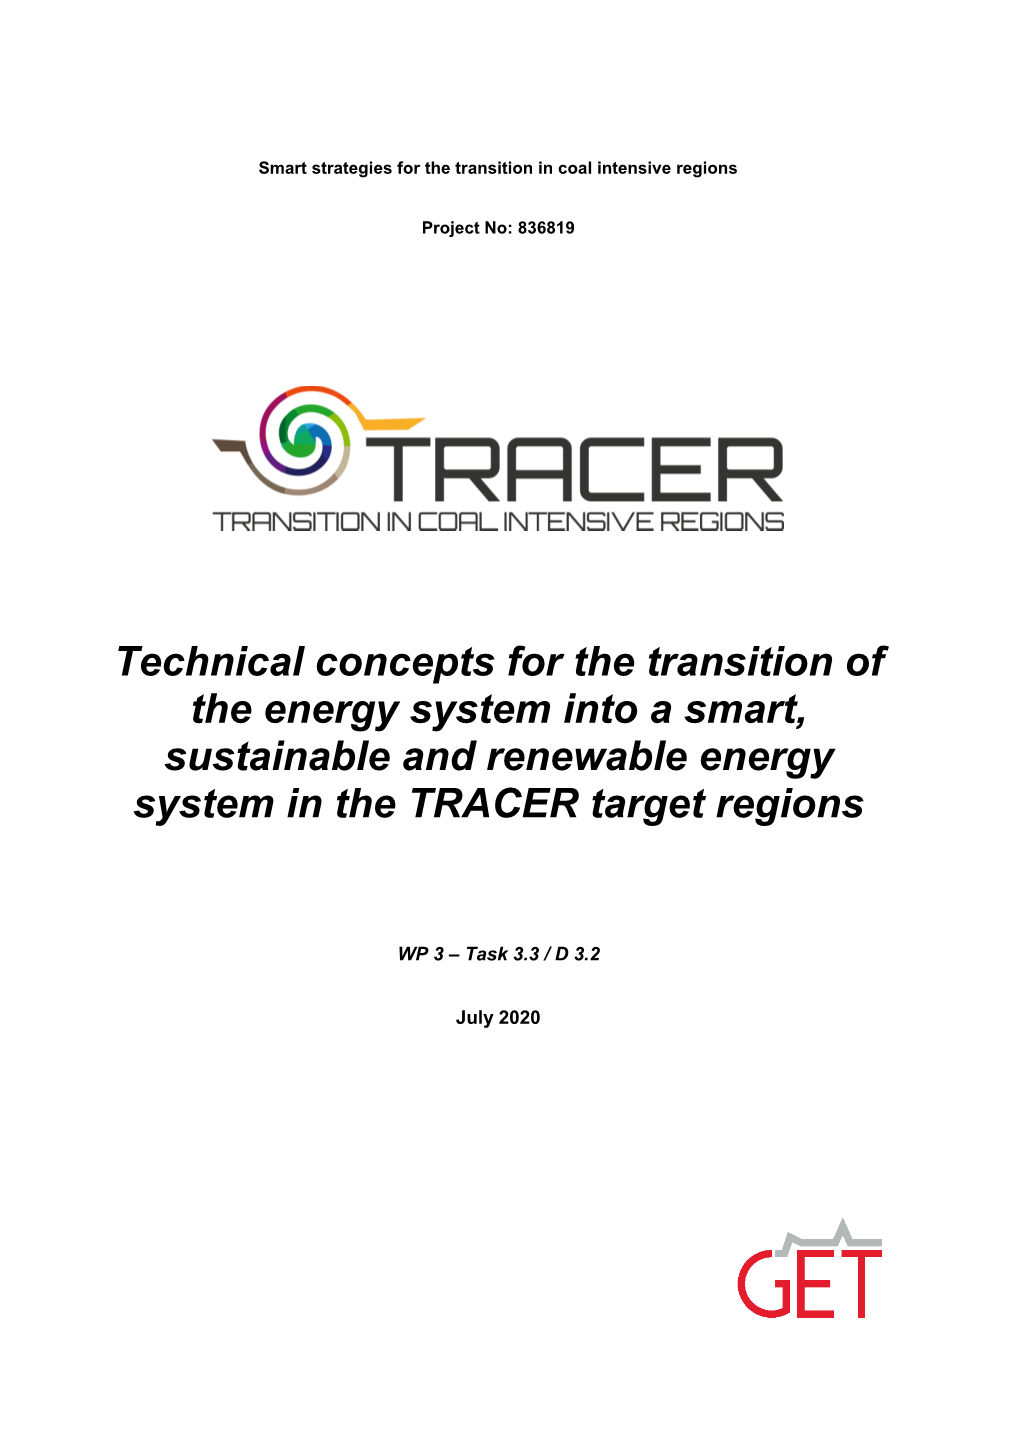 Technical Concepts for the Transition of the Energy System Into a Smart, Sustainable and Renewable Energy System in the TRACER Target Regions